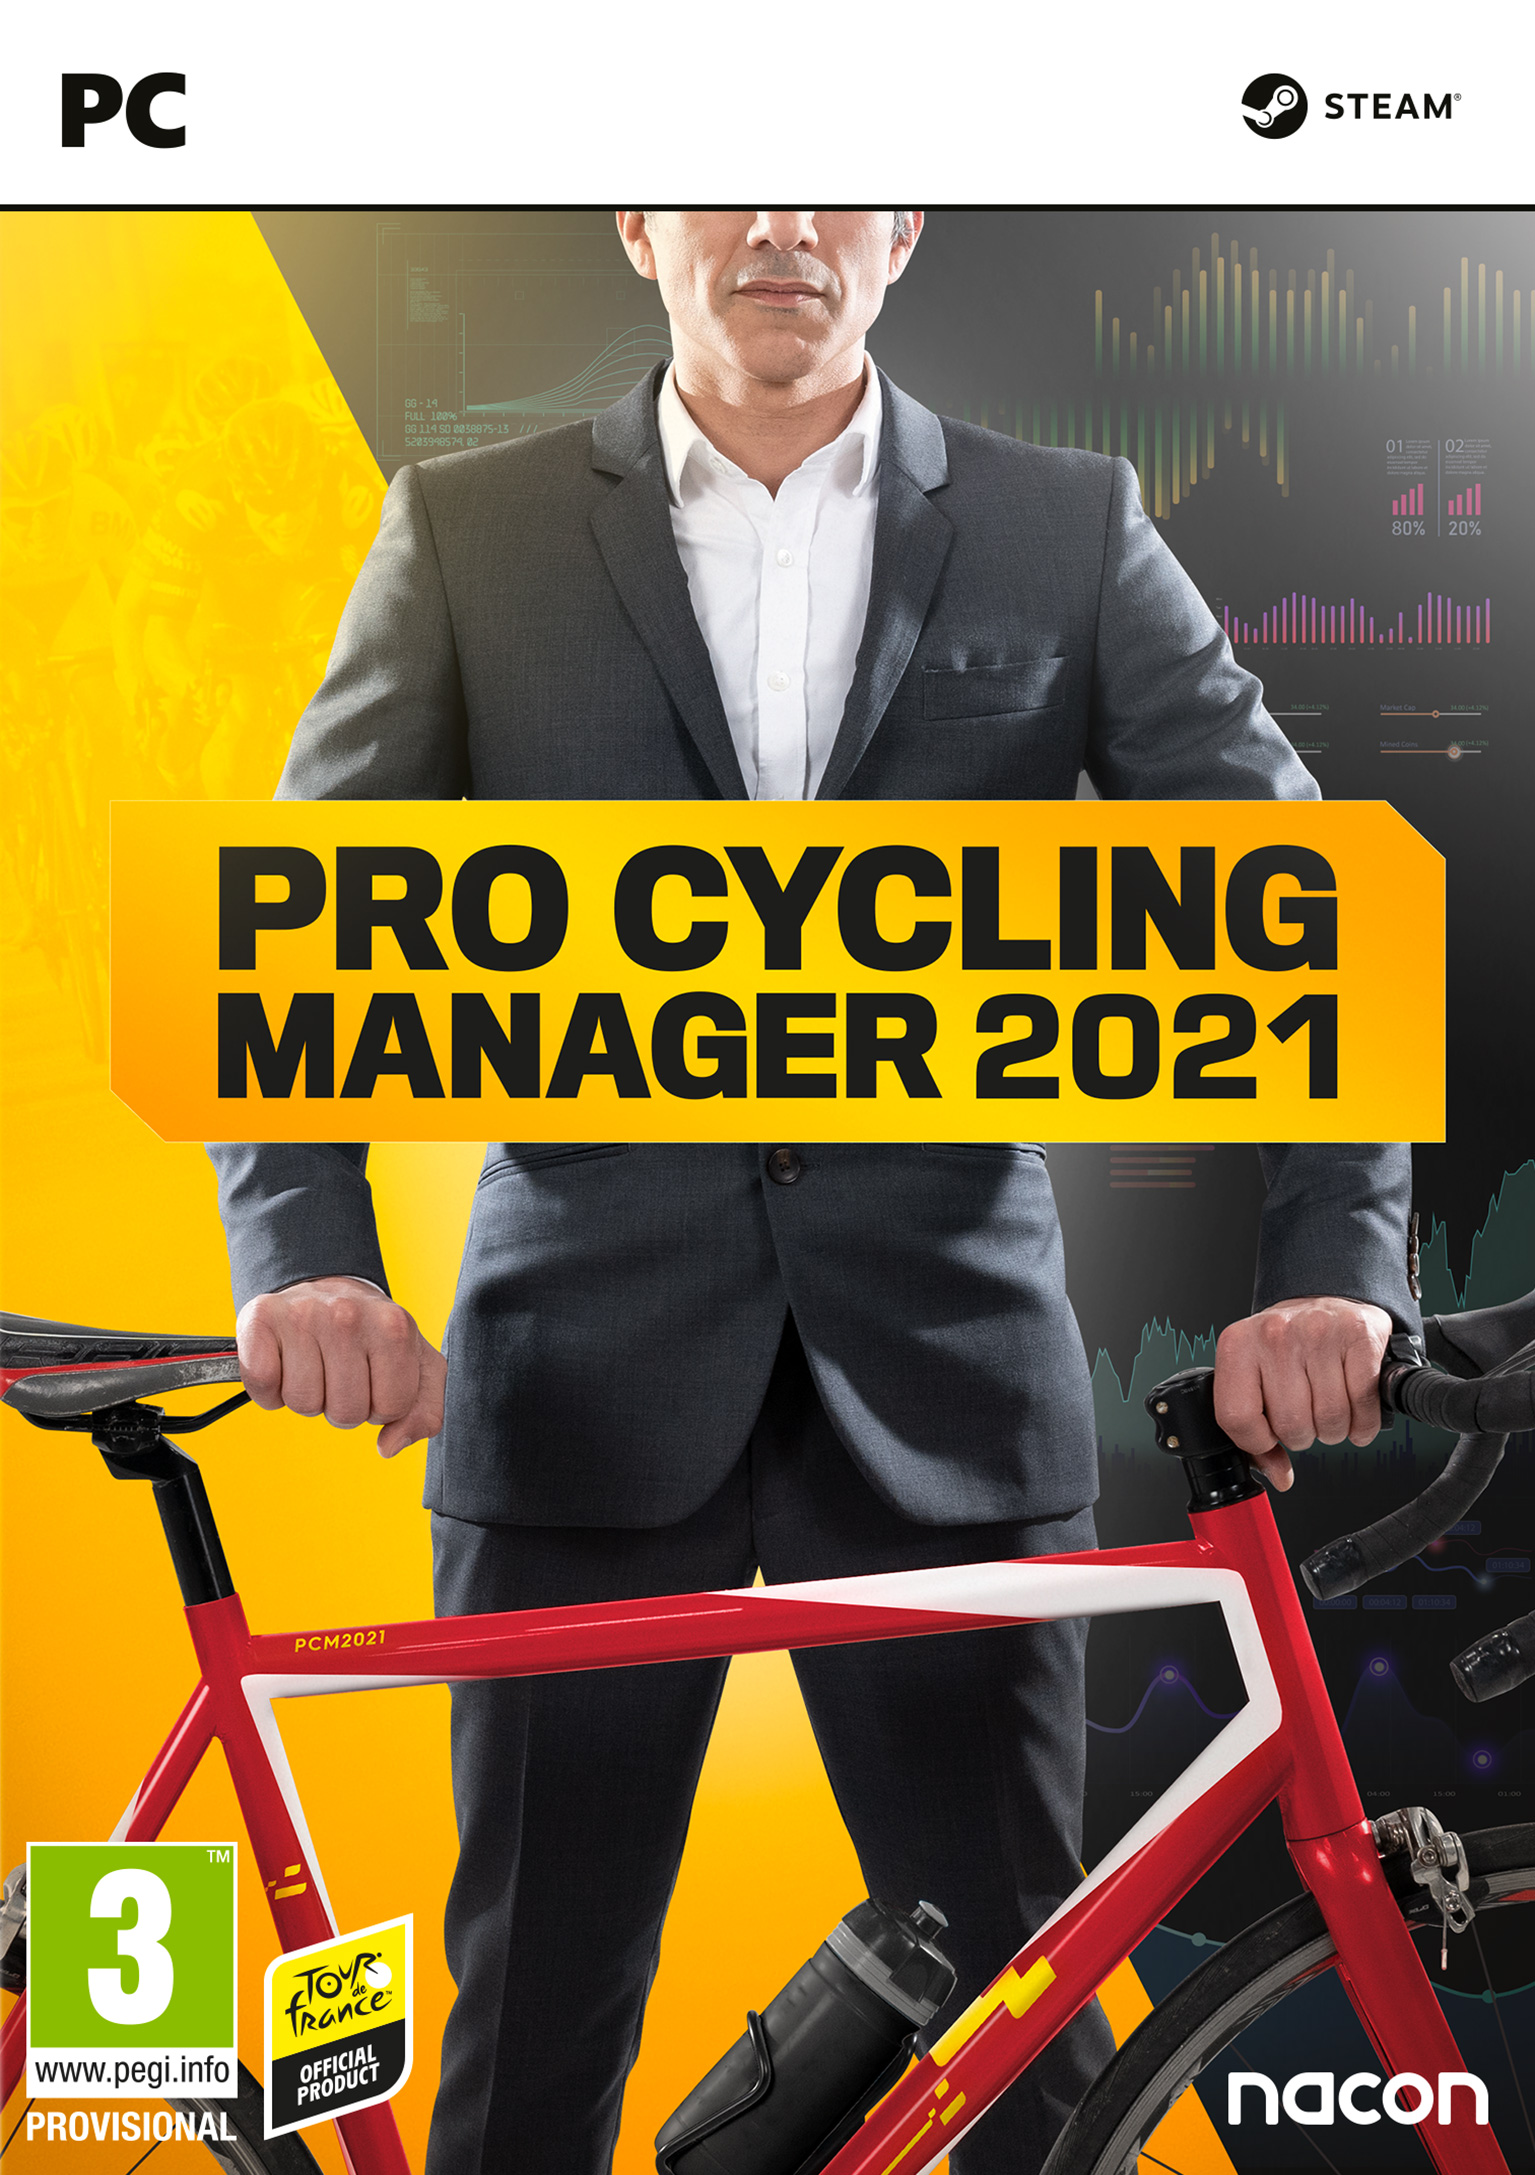 Pro Cycling Manager 2021 - pedn DVD obal